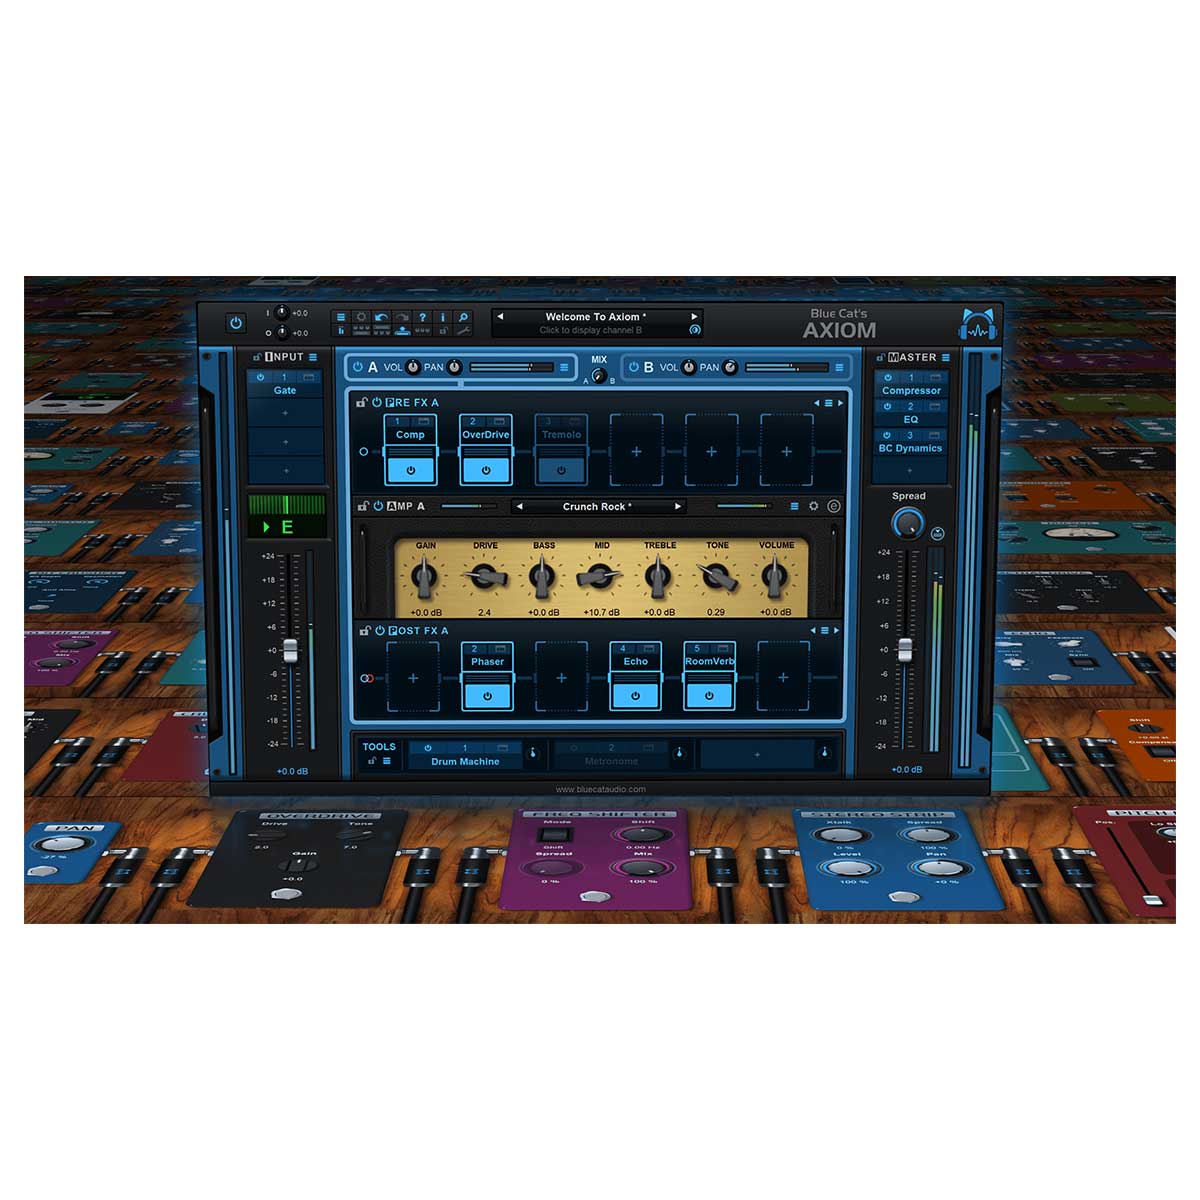 Blue Cat&#39;s Axiom Multi-Effects Processor and Amp Simulation Software for Guitar and BassBlue Cat&#39;s Axiom Multi-Effects Processor and Amp Simulation Software for Guitar and Bass